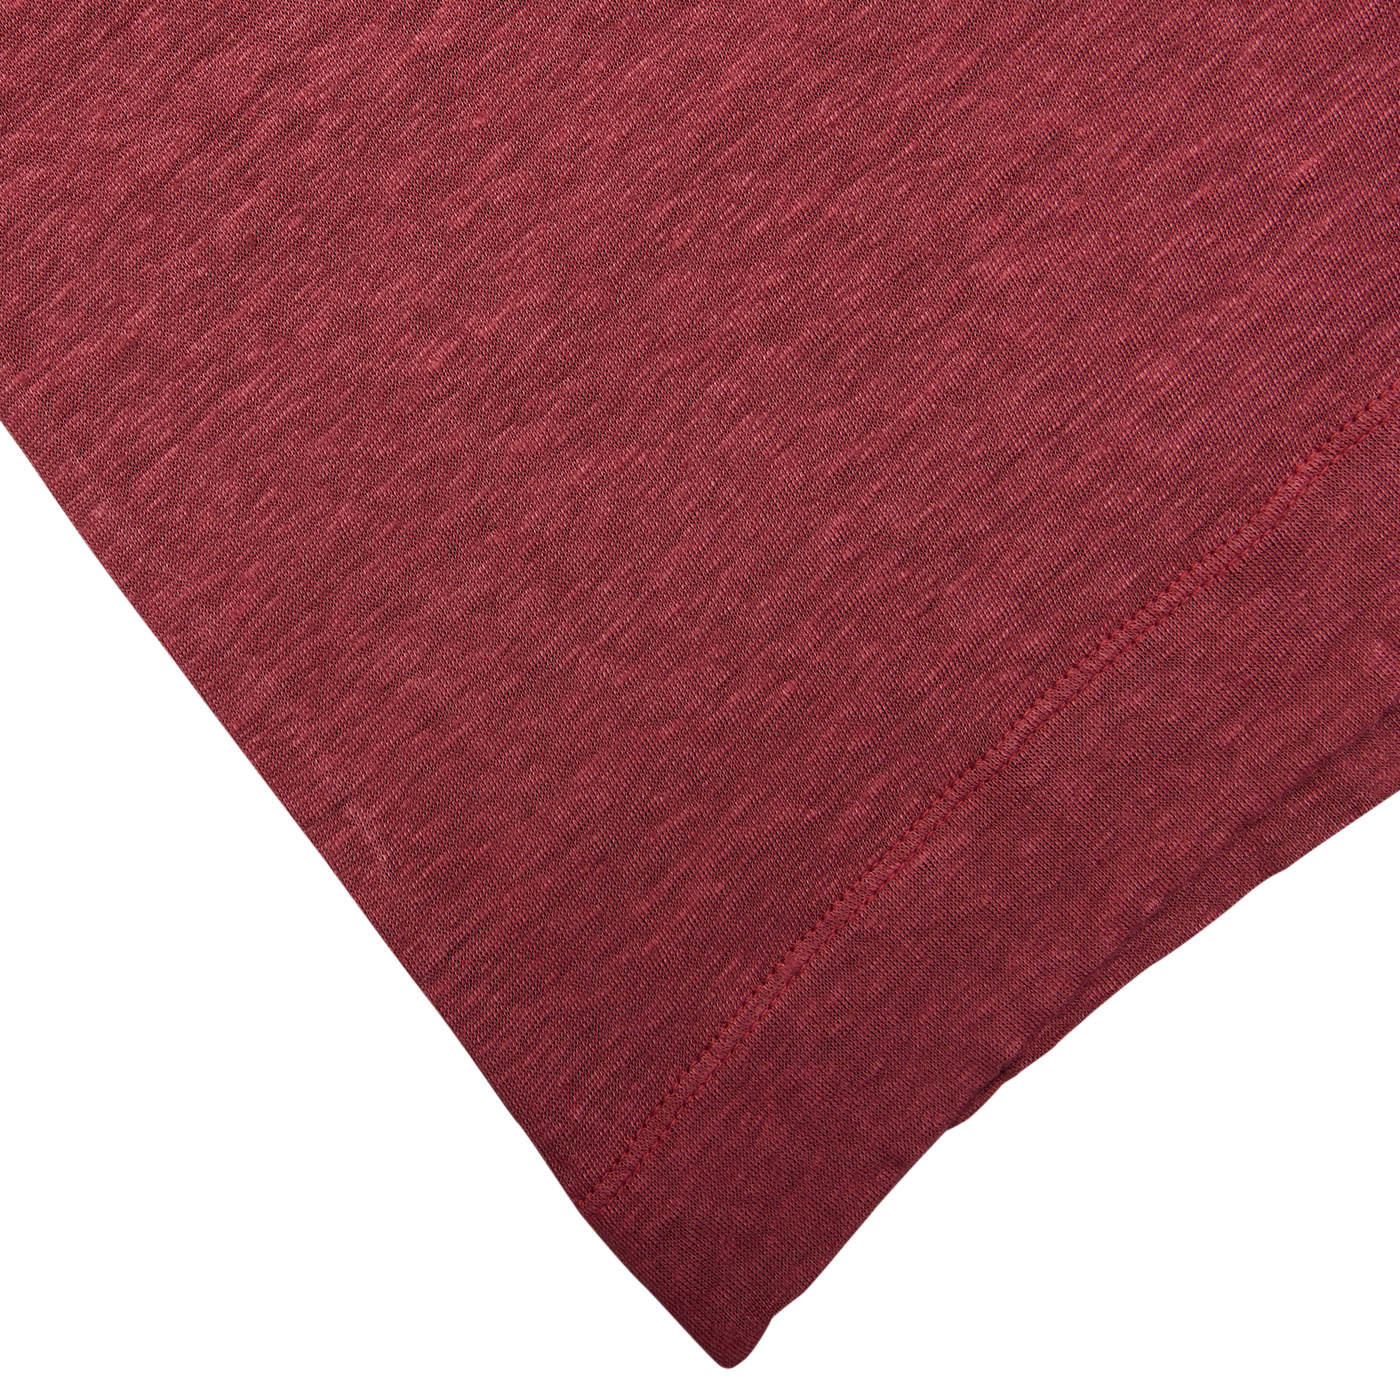 Raspberry Red Linen Polo Shirt fabric with a textured weave on a white background by Massimo Alba.